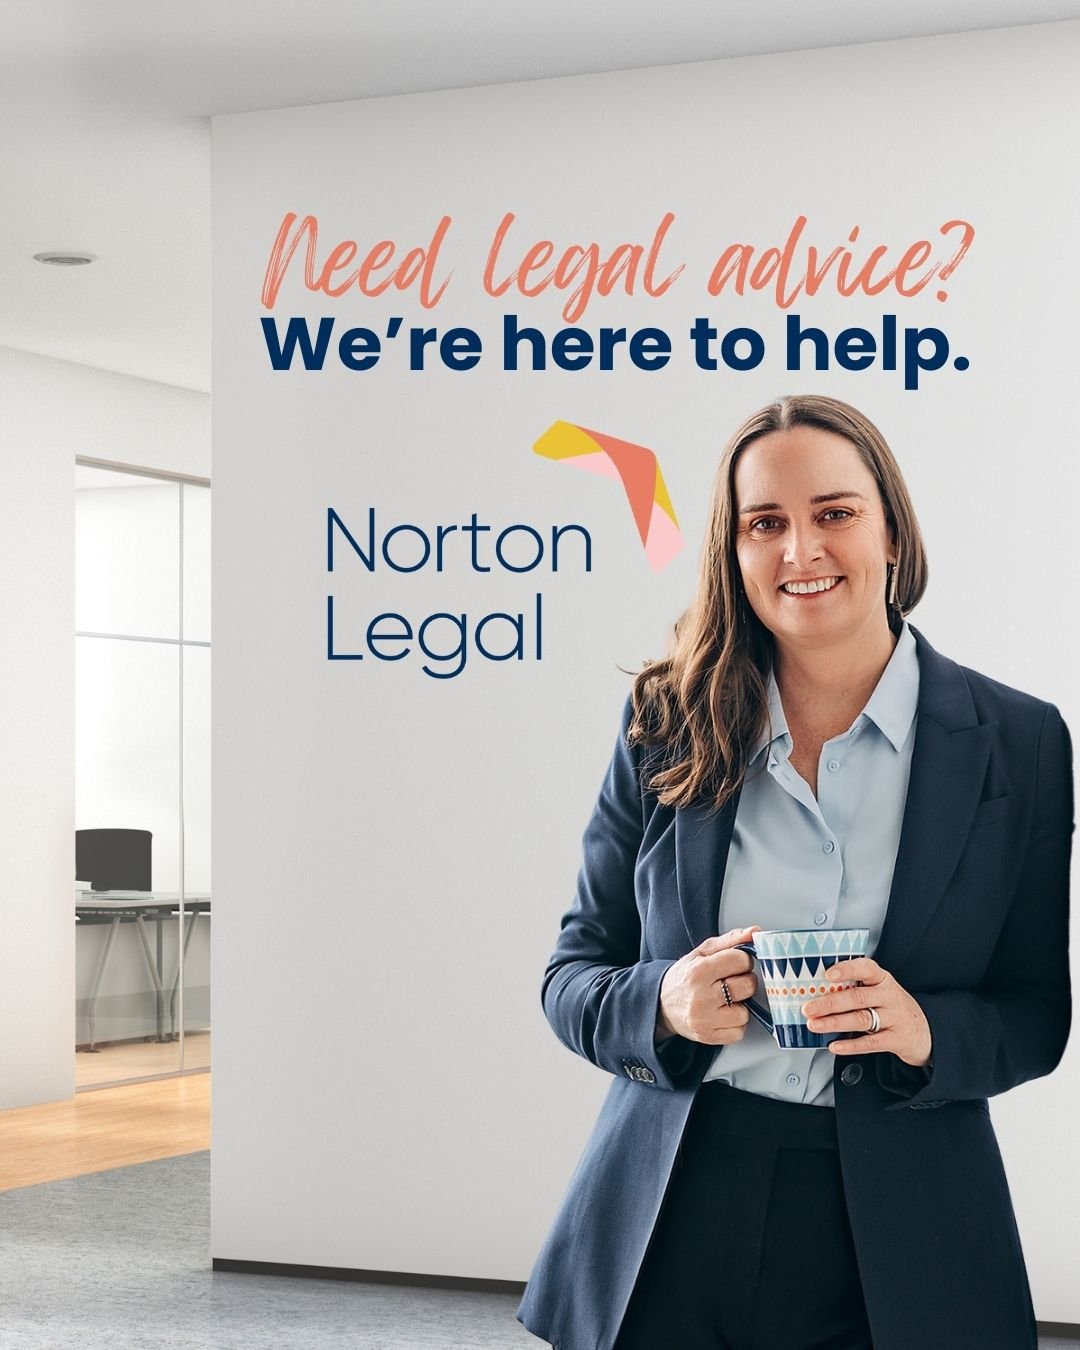 Estate disputes can be emotionally draining, but you don't have to face them alone. 
Norton Legal is here to be your advocate, fighting for your rights and ensuring fair resolution. 
Reach out to us today for compassionate and skilled representation.